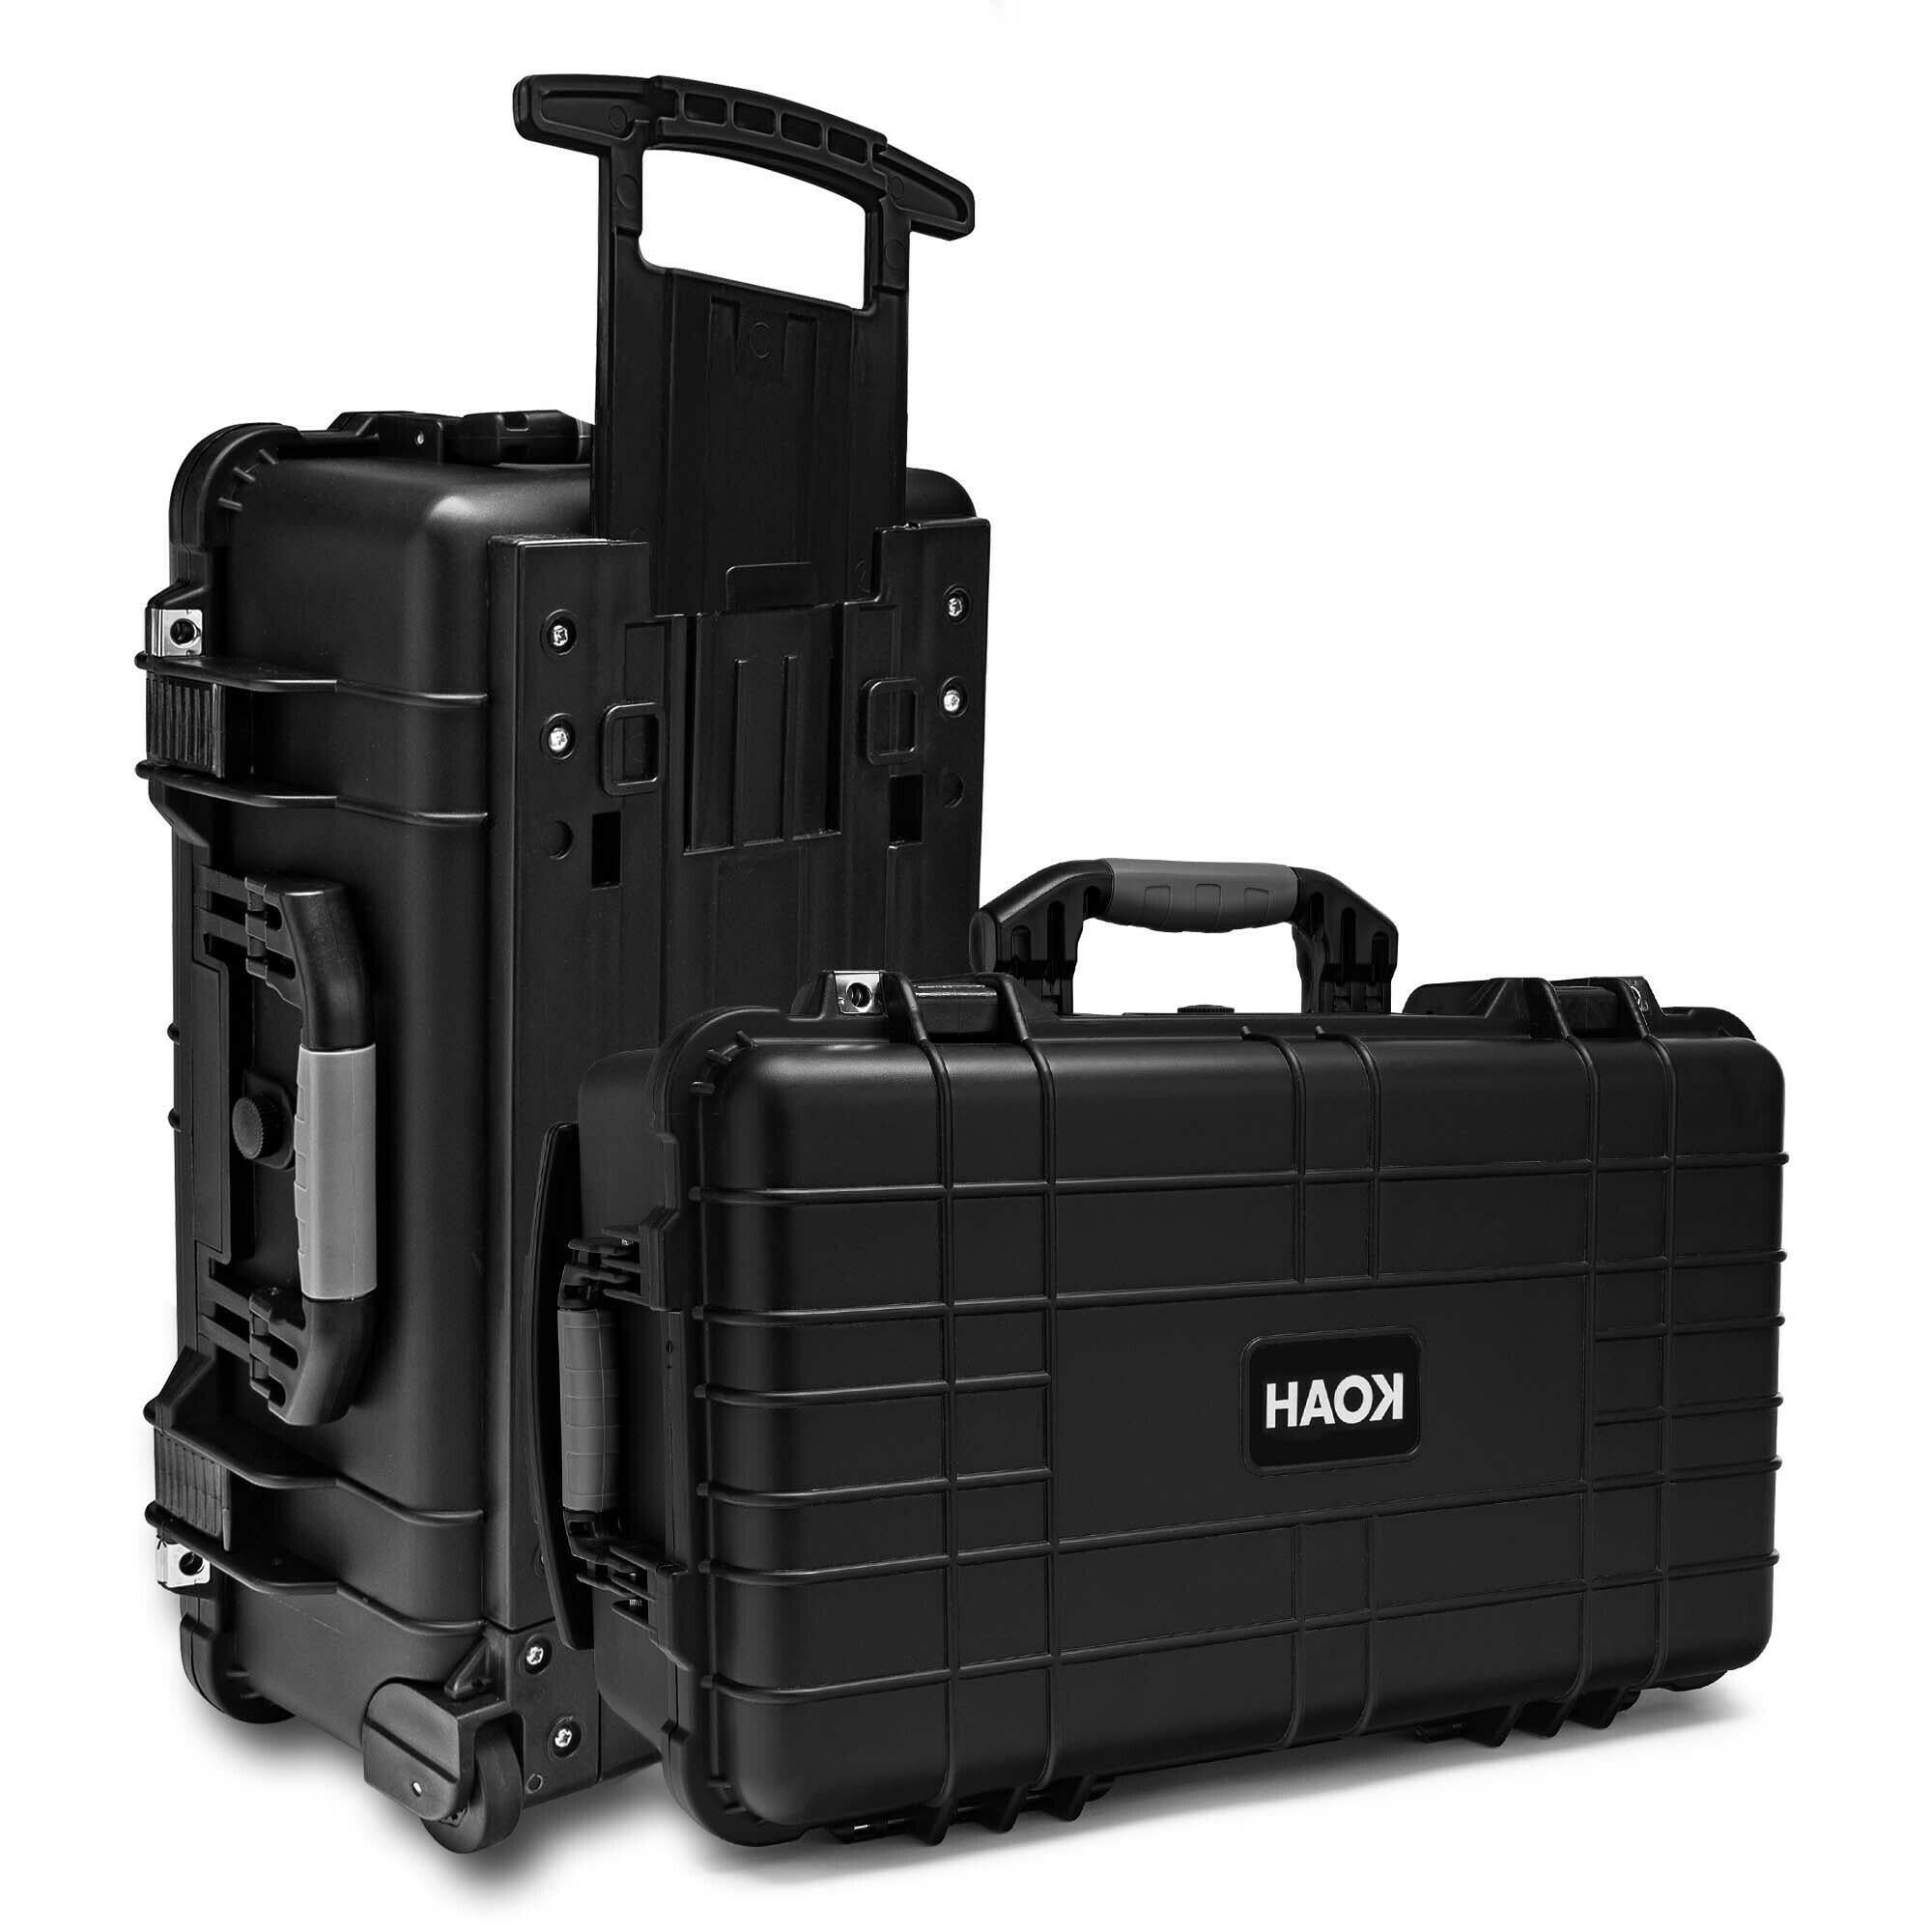 in-Ear Wireless Art.60-02A: NO Wheels | int.19.29x14.37x7.48 in. Protective Carrying case for Dron DGCASE 22 Hard Case with Foam 3 Layers Lens or Camera Set 